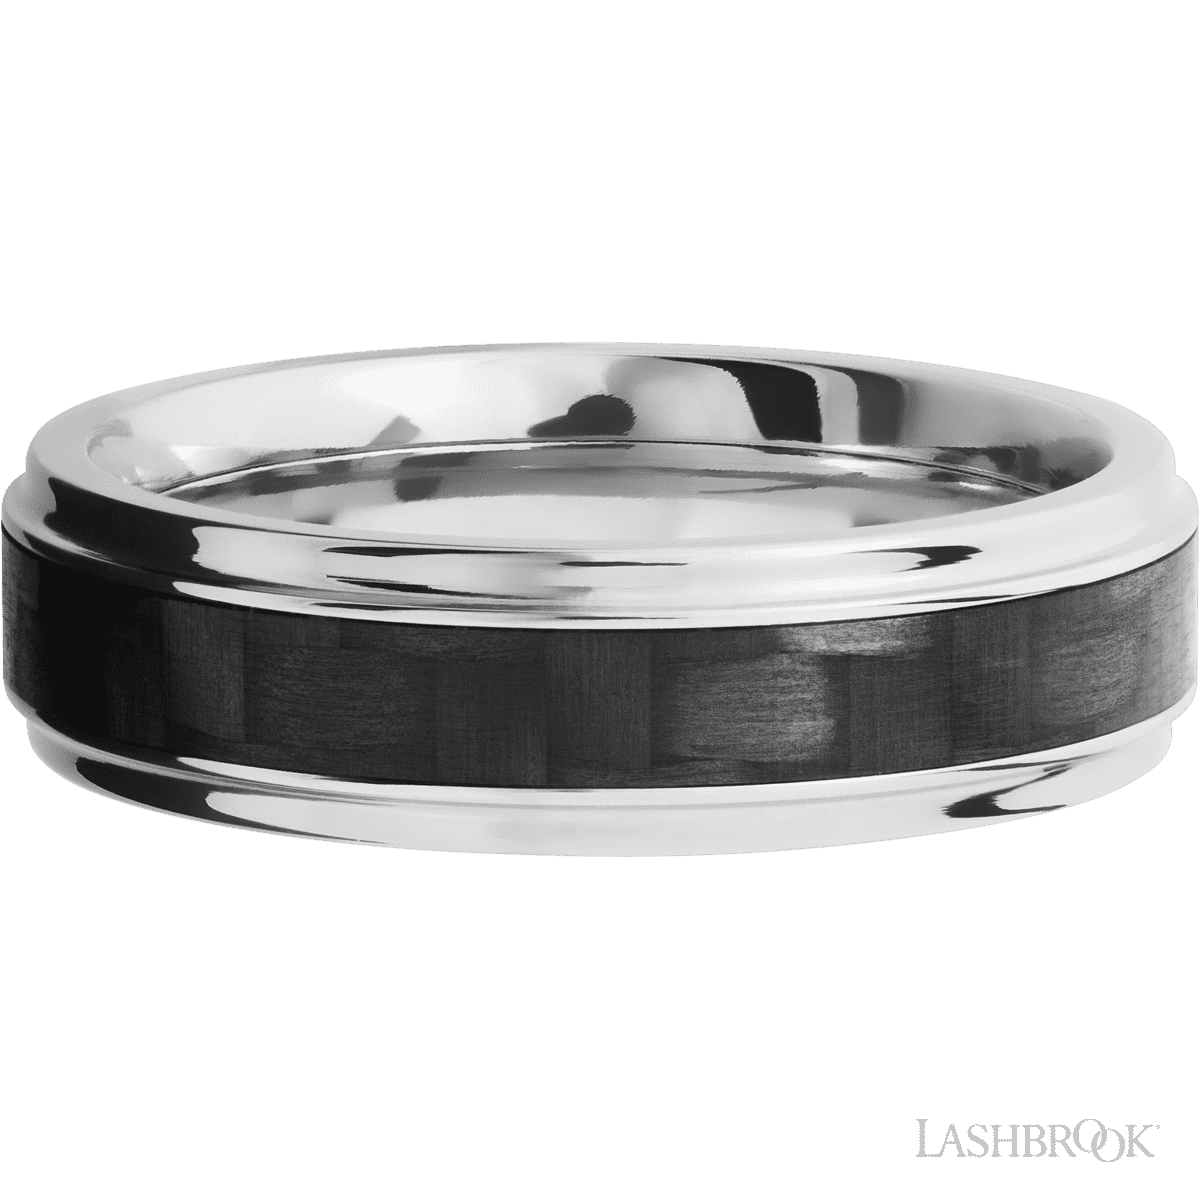 6 mm wide/Flat Grooved Edges/Titanium band with one 3 mm Centered inlay of Carbon Fiber